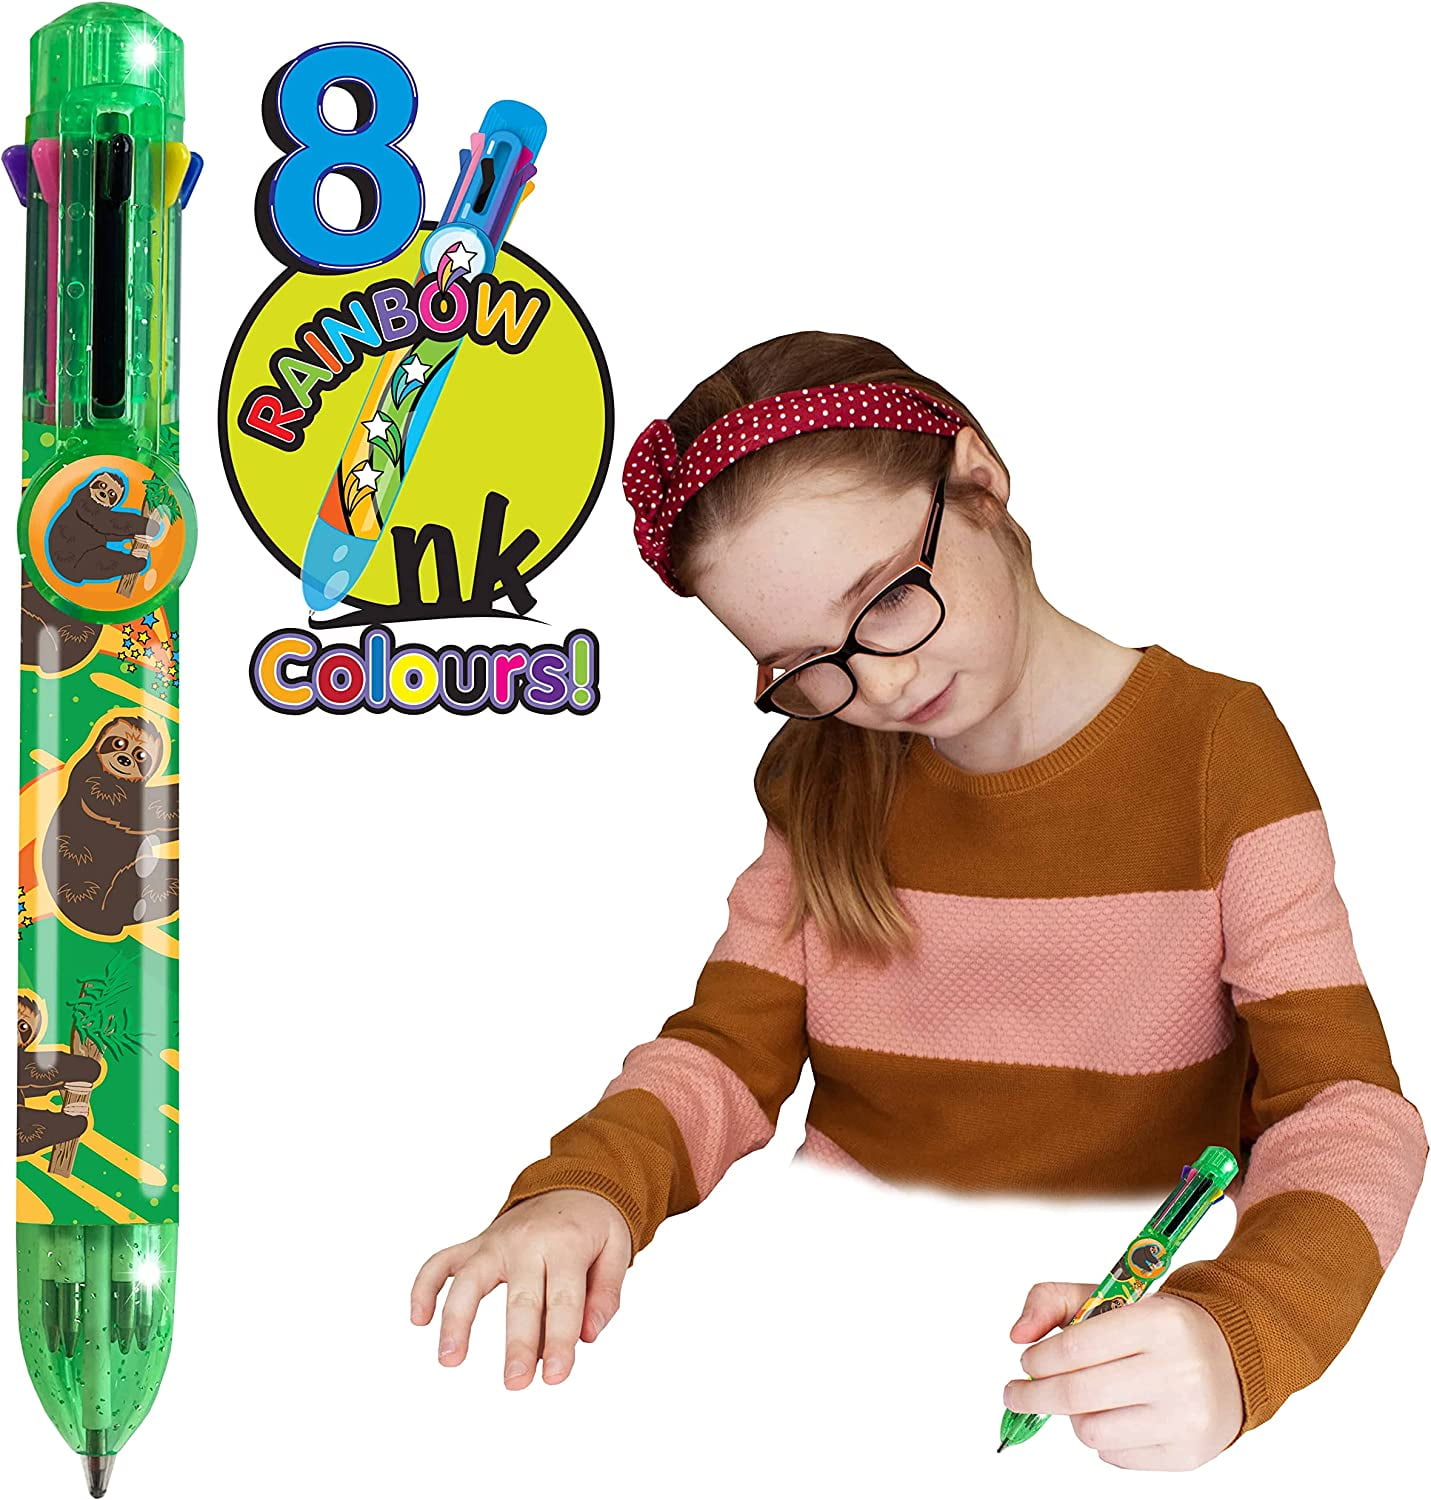 Rainbow Writer - Sloth Multicolor Pen from Deluxebase. 8 in 1 Retractable  Ballpoint Pen. Colored Pens for Kids Back to School Supplies and Office  Supplies. Sloth Pen Party Favors for Kids. 